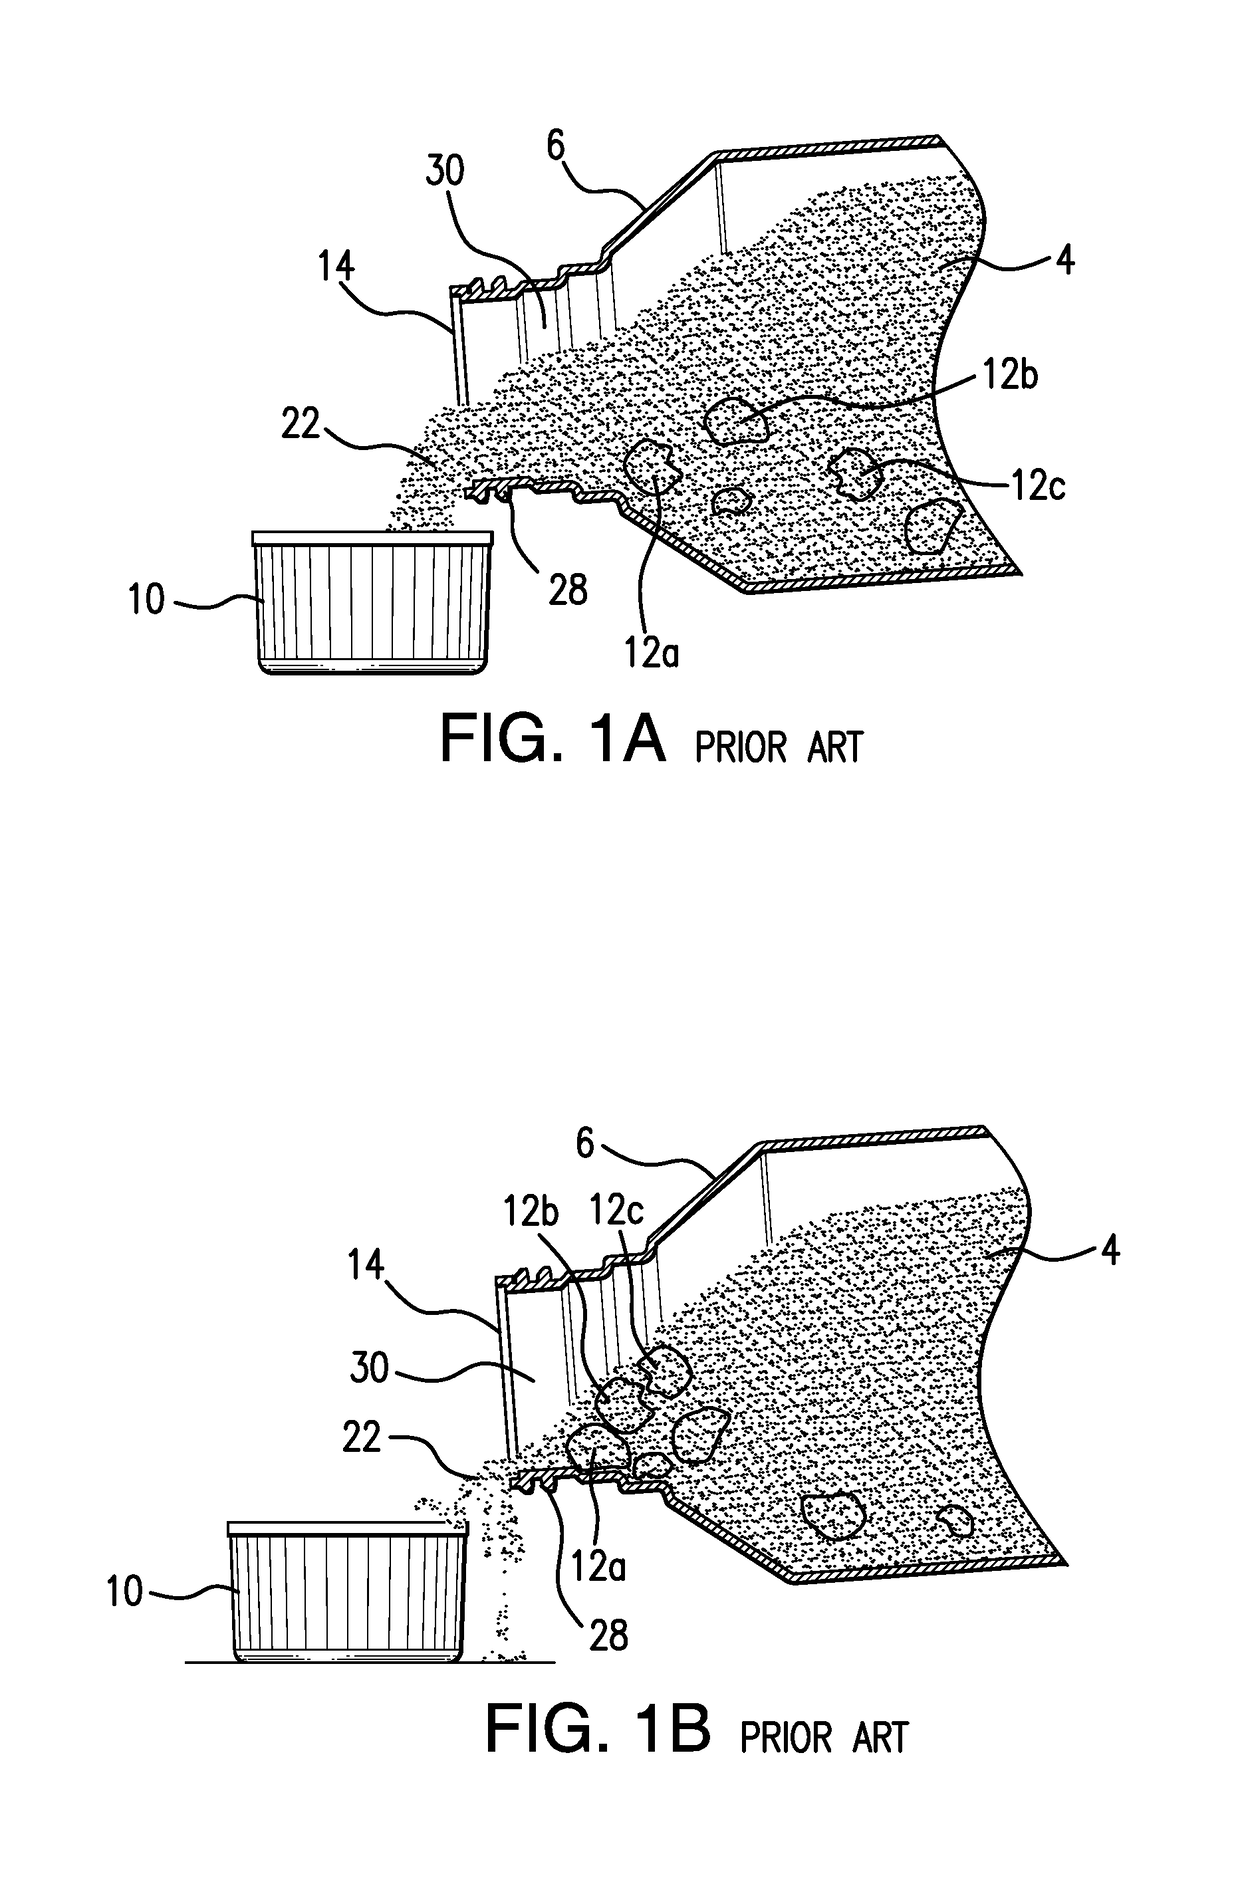 Fitment and container for powdered products, especially powdered products prone to clumping behavior